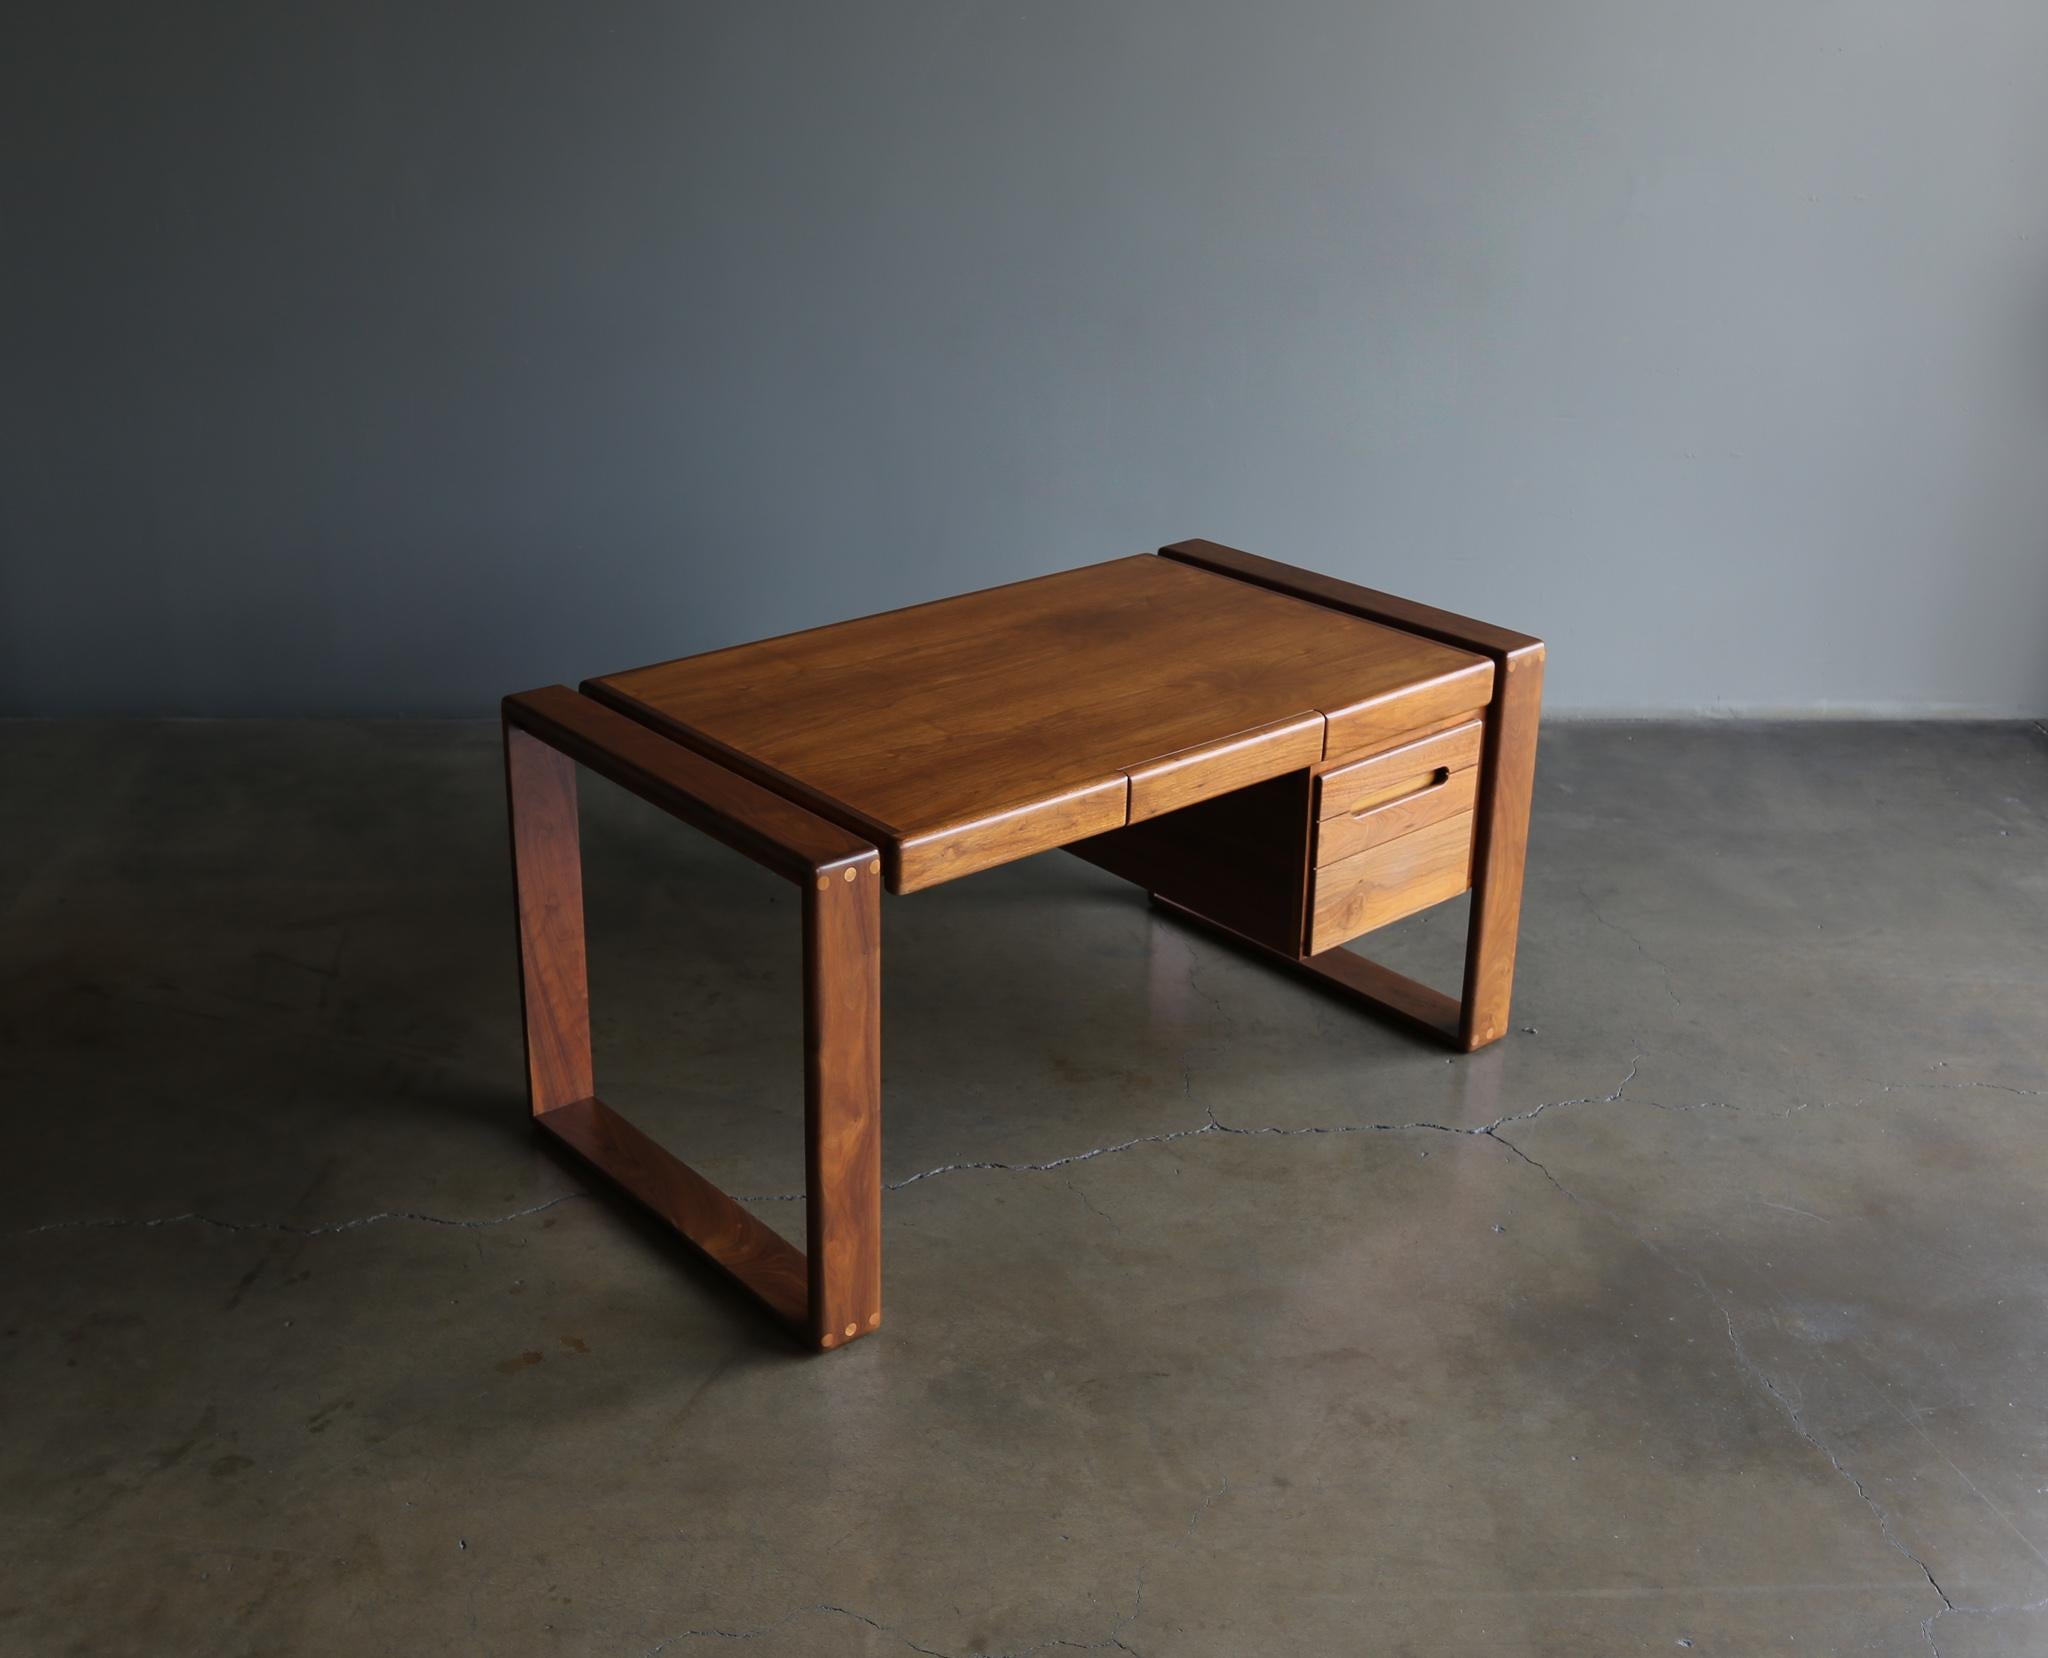 Lou Hodges handcrafted walnut desk for California Design Group, 1979. This piece has been professionally restored. Signed to the drawer interior.